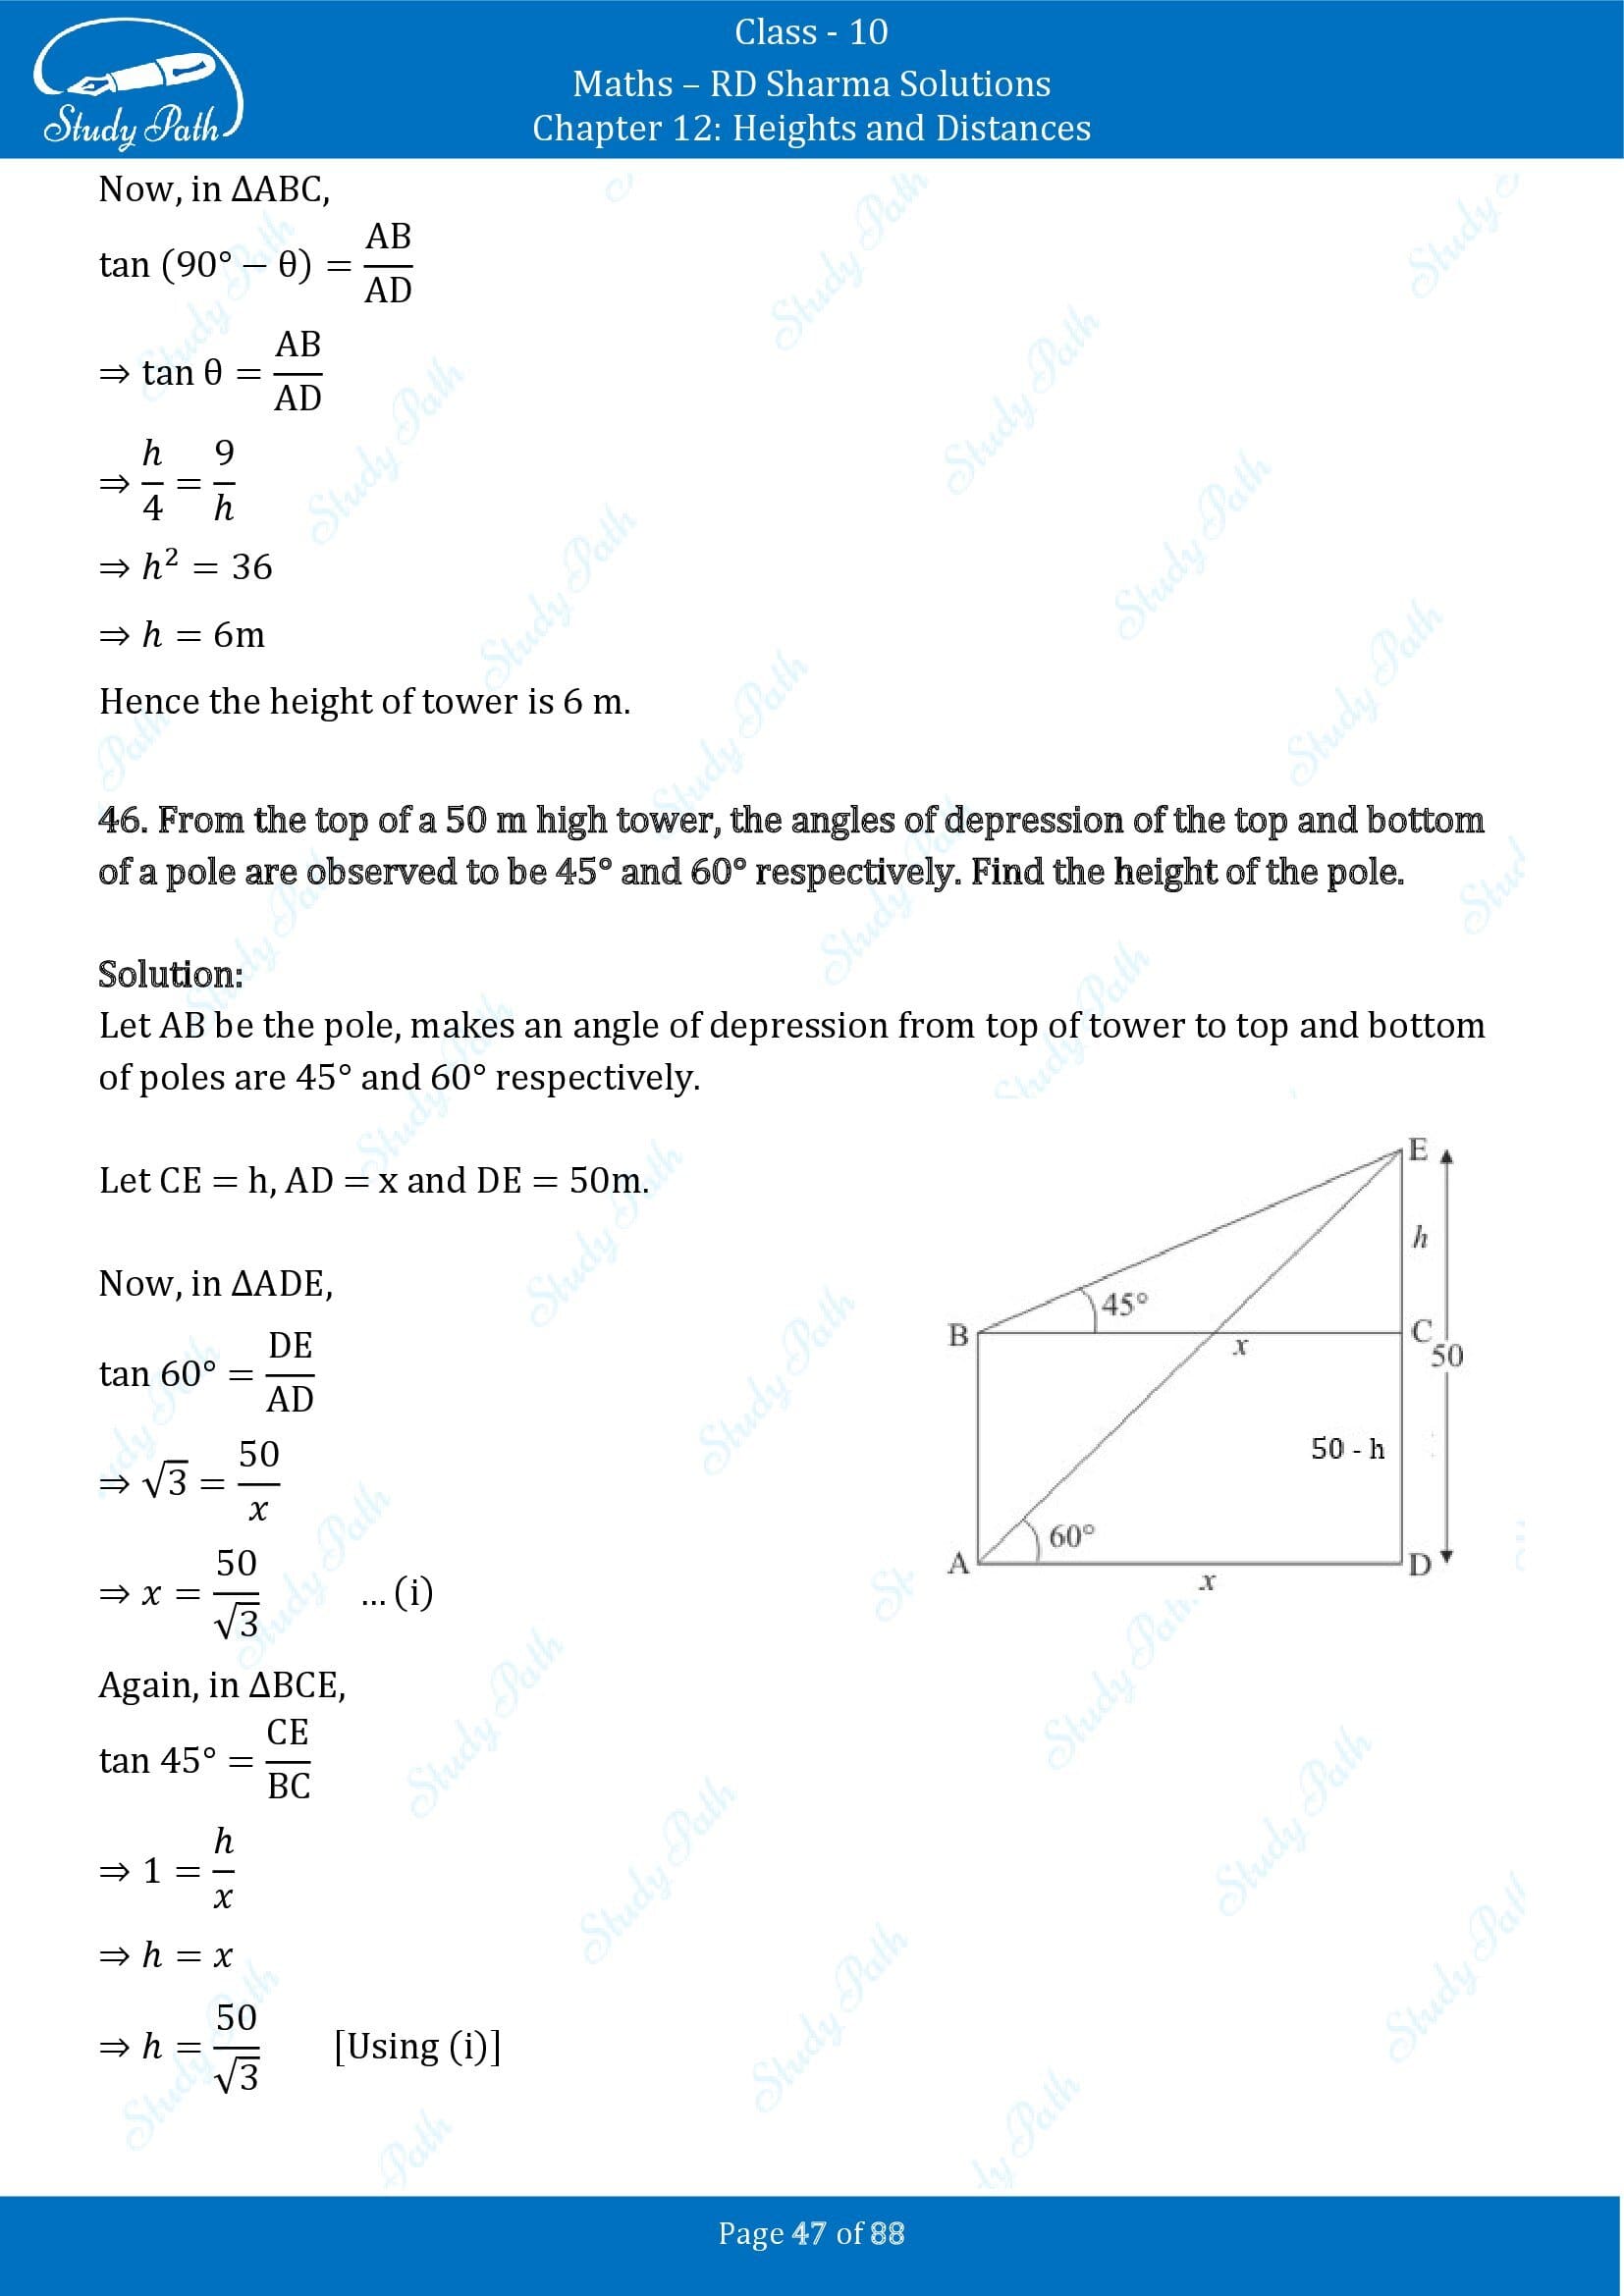 RD Sharma Solutions Class 10 Chapter 12 Heights and Distances Exercise 12.1 00047